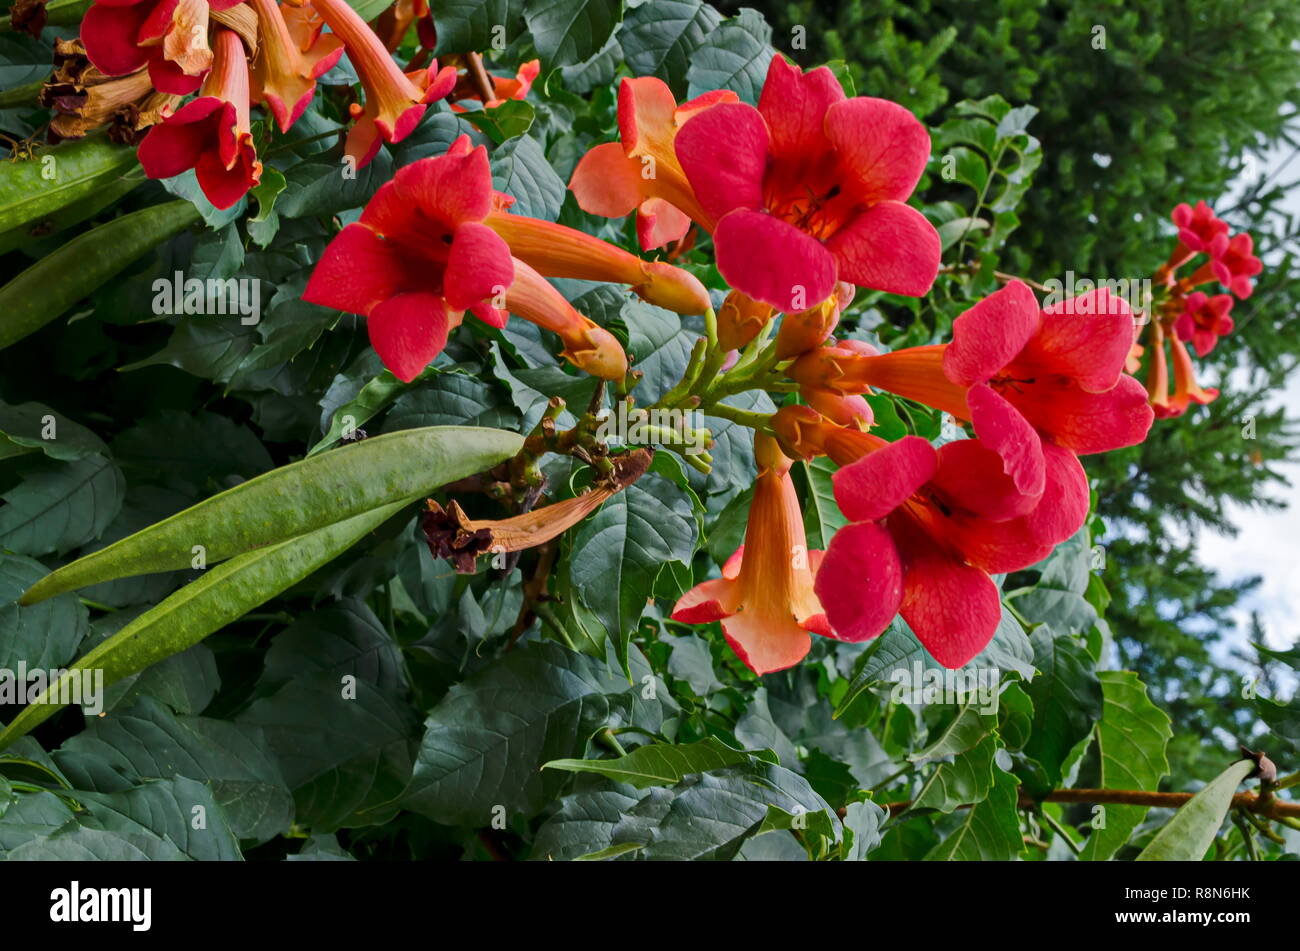 Red bloom and leaves of Trumpet creeper or  Campsis radicans tree  in street, town Delchevo, Macedonia, Europe Stock Photo